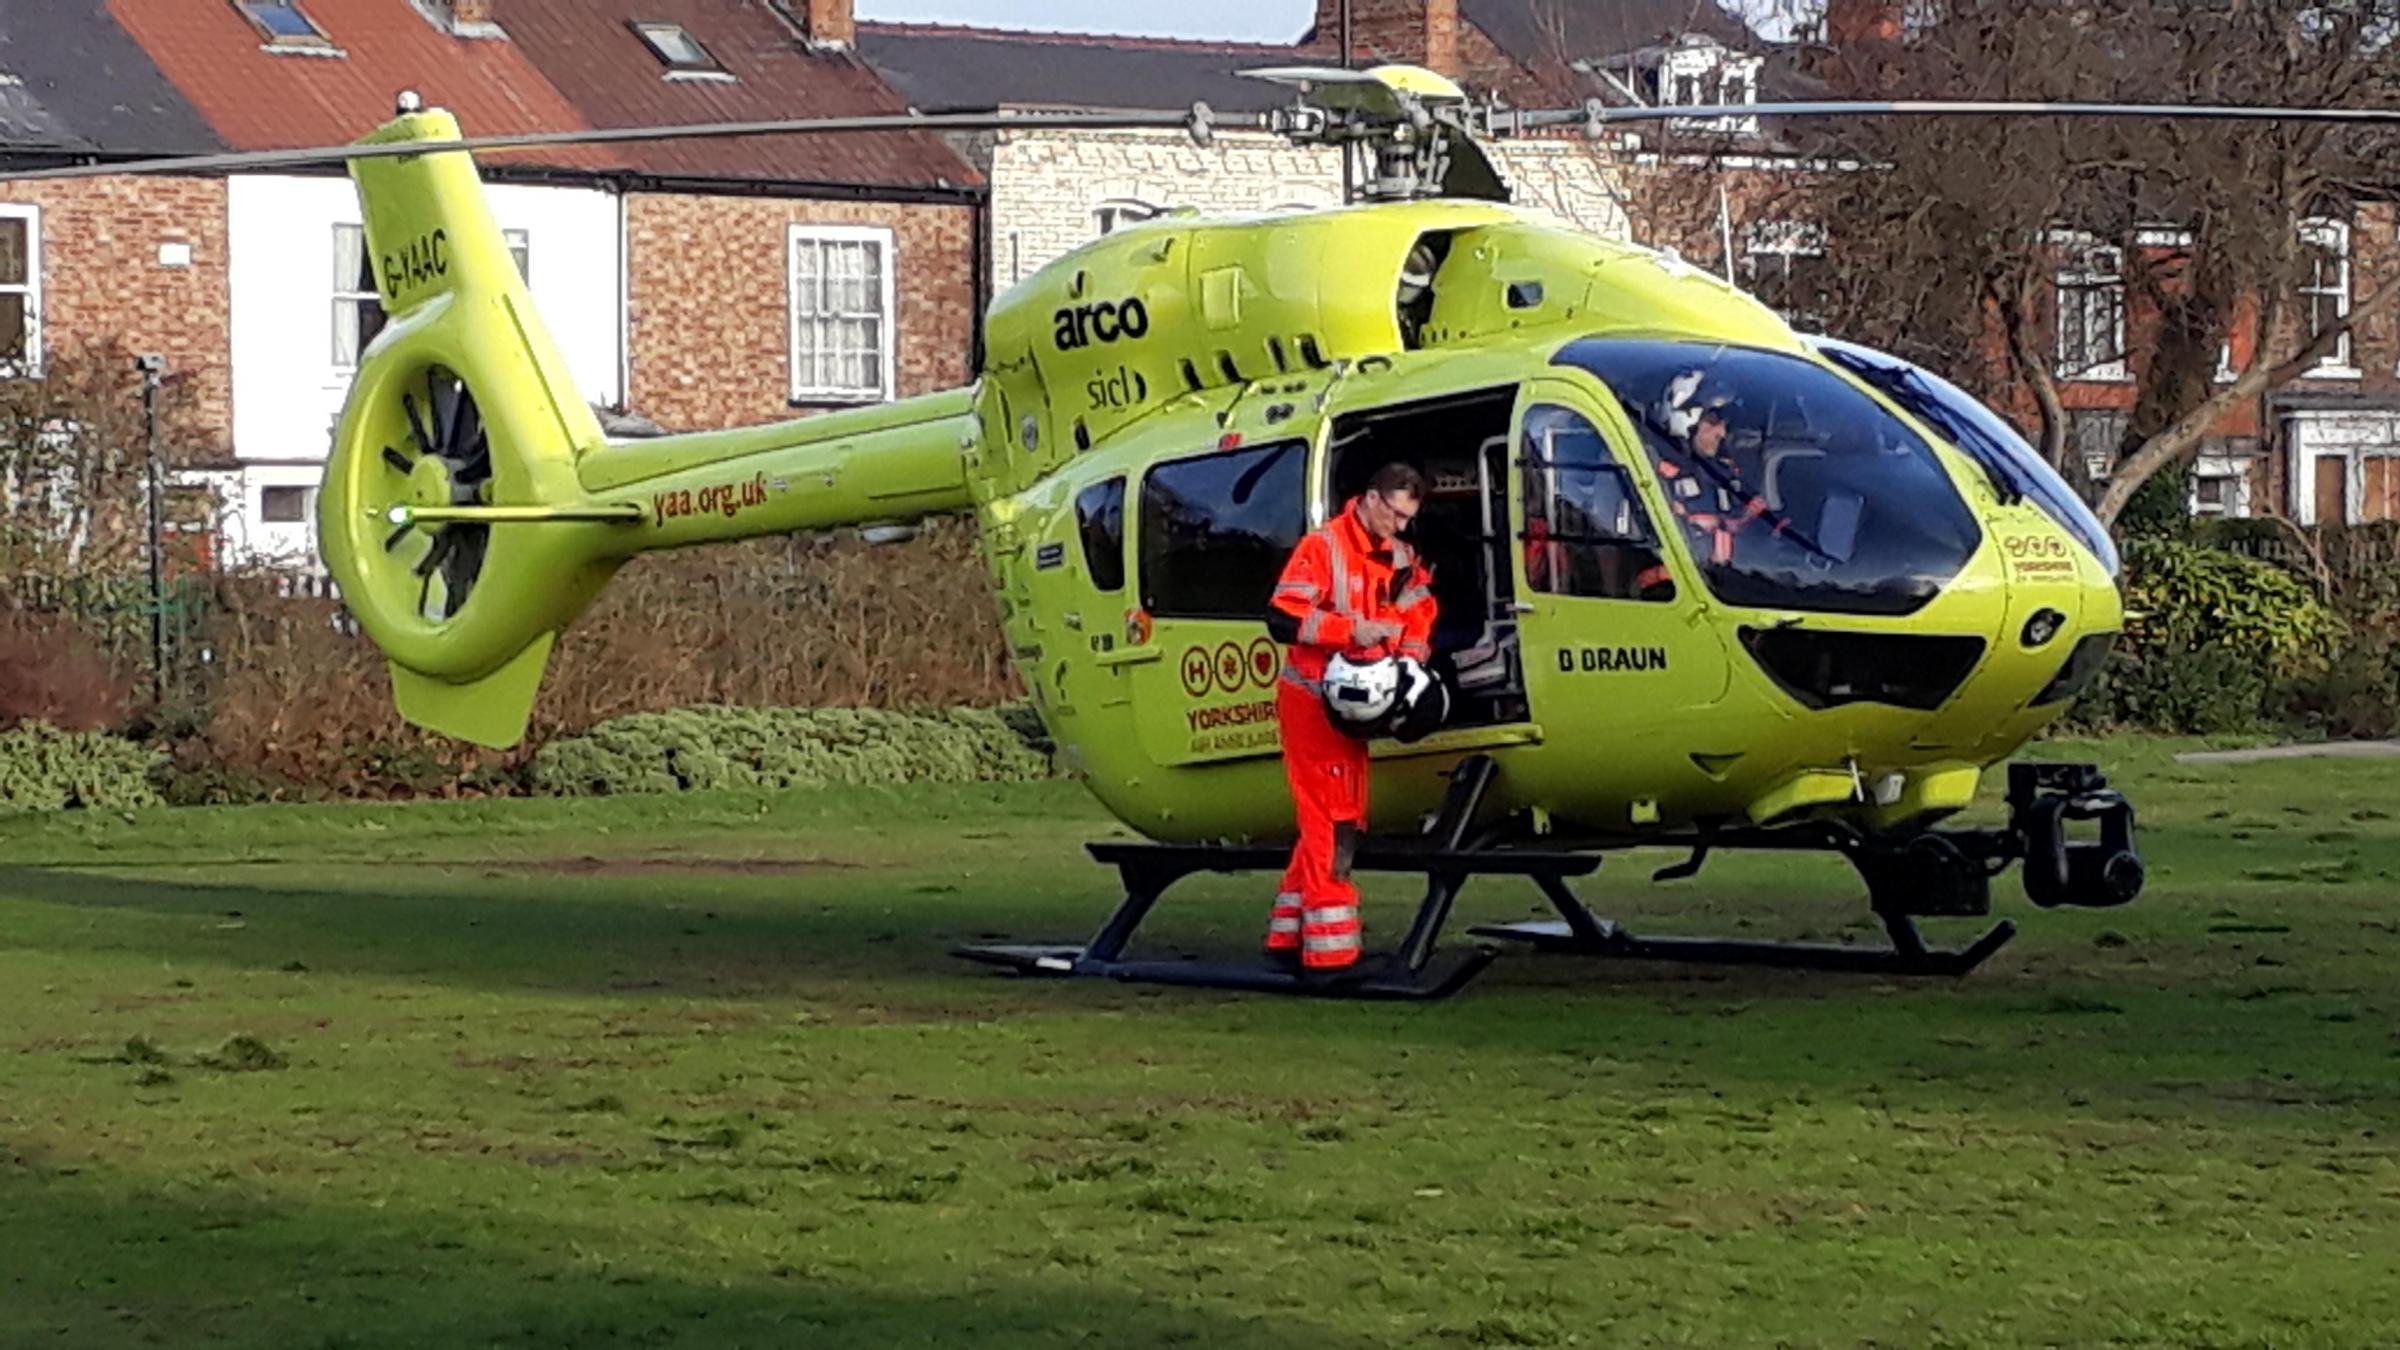 Roads closed and air ambulance called after accident